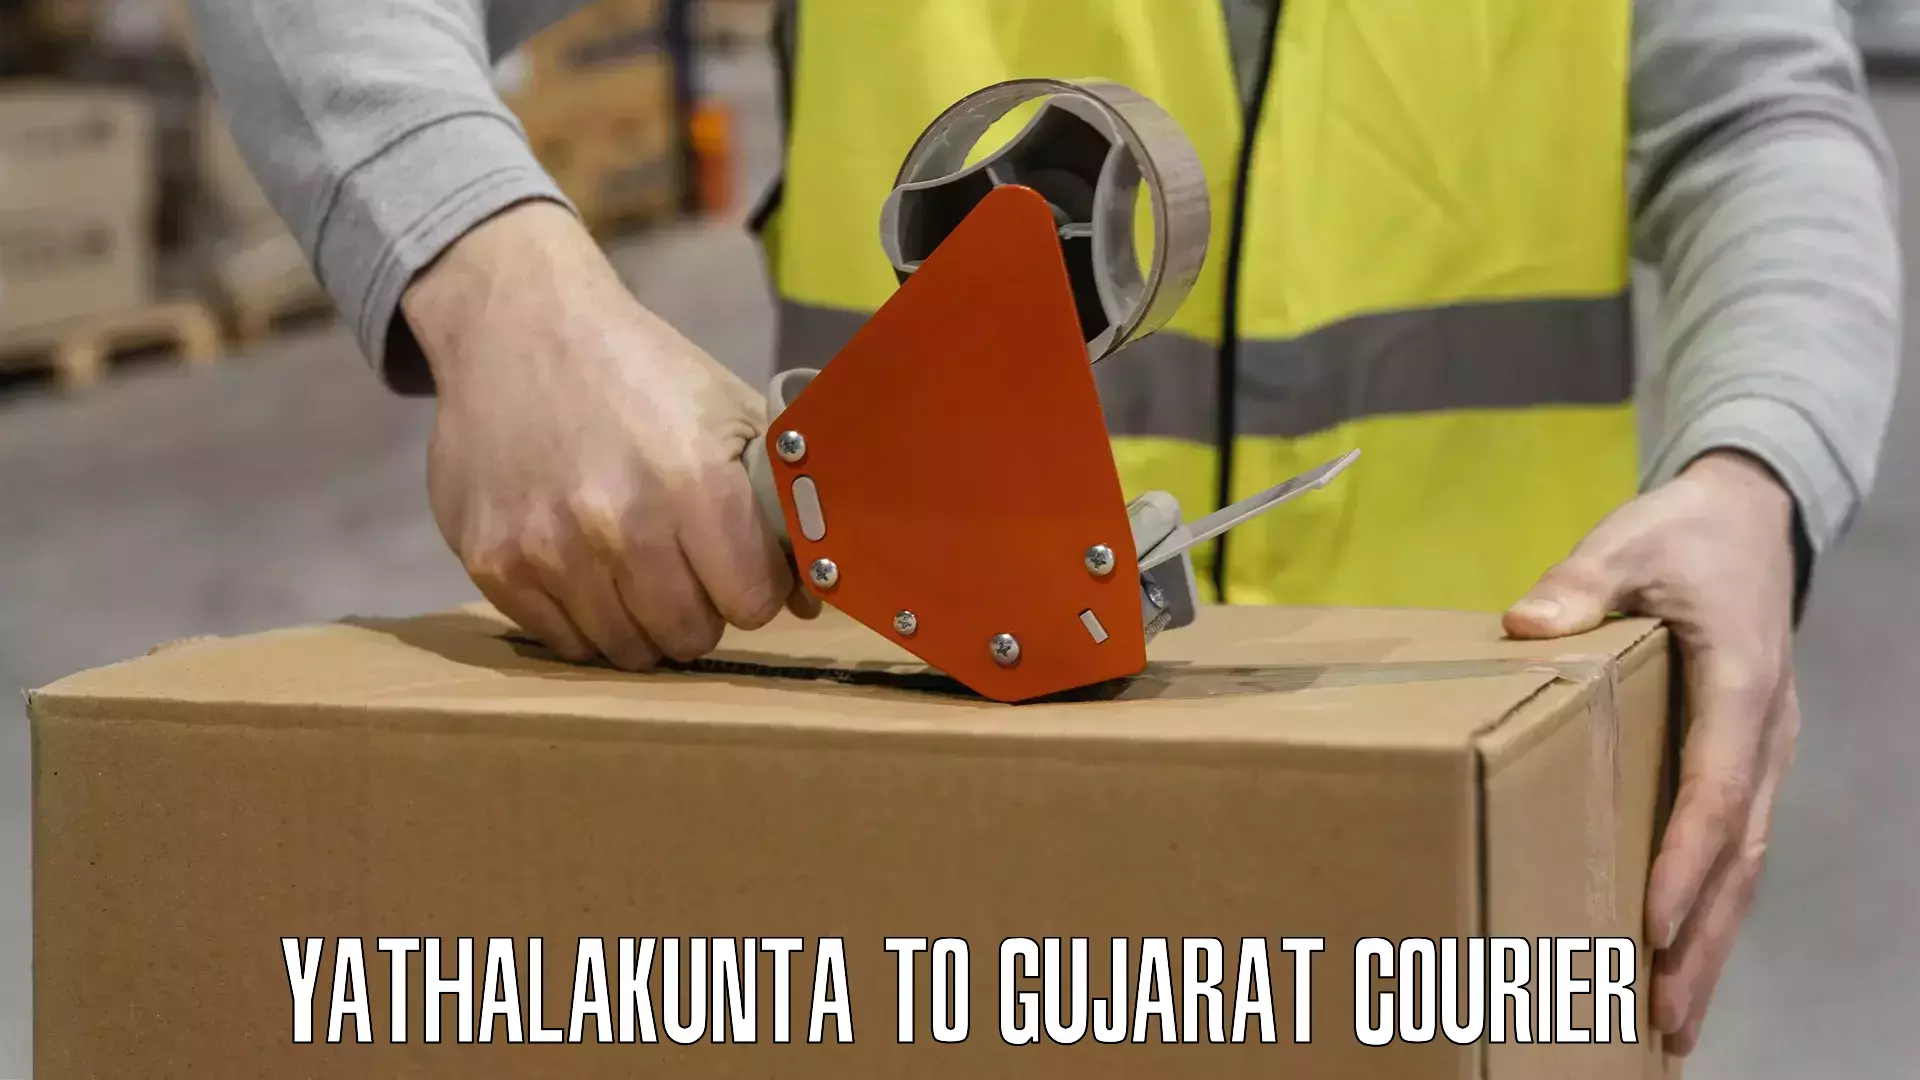 Bulk courier orders Yathalakunta to Anand